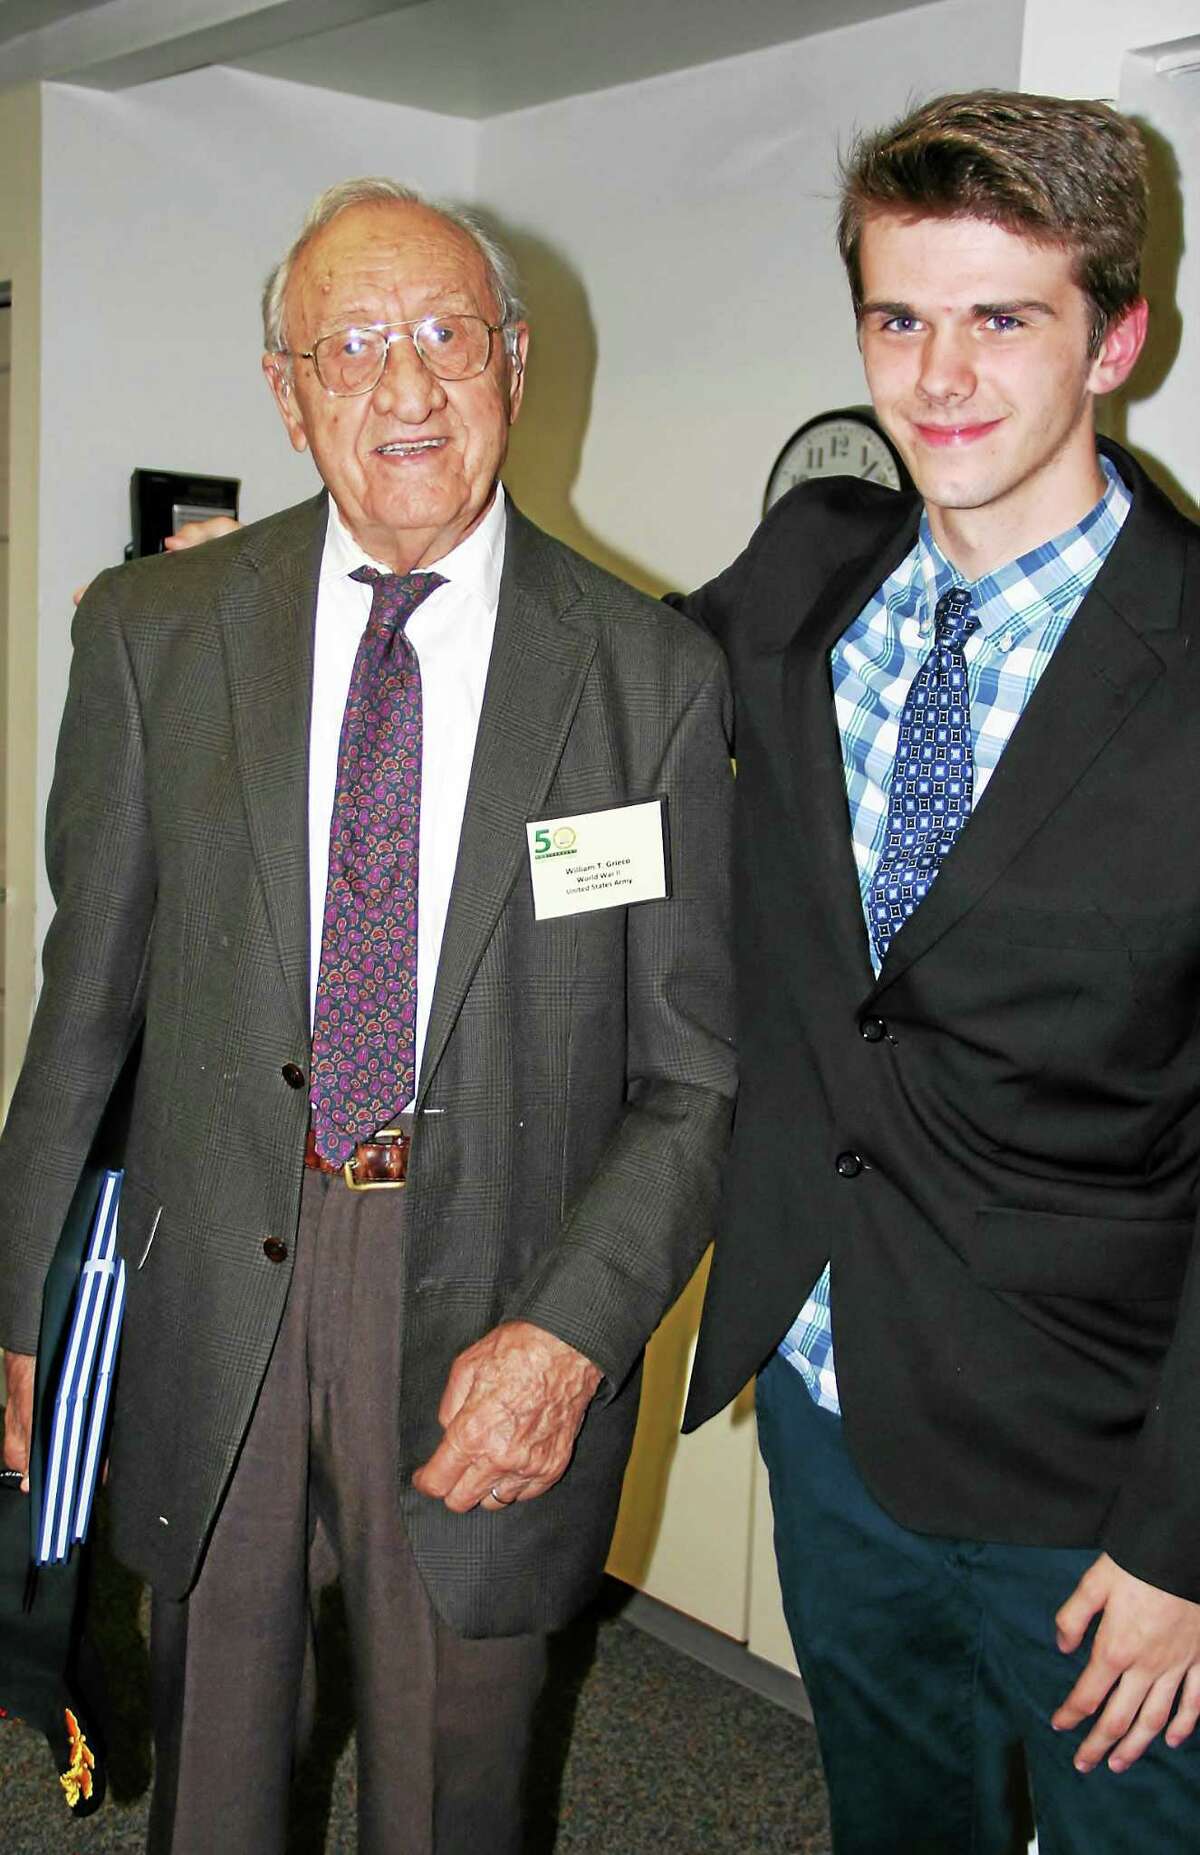 William T. Grieco, left, a European World War II veteran from Torrington, with his interviewer, Torrington High School student Richard James Baker, at the veterans project ceremony Thursday in Founders Hall auditorium on the campus of Northwestern Connecticut Community College.